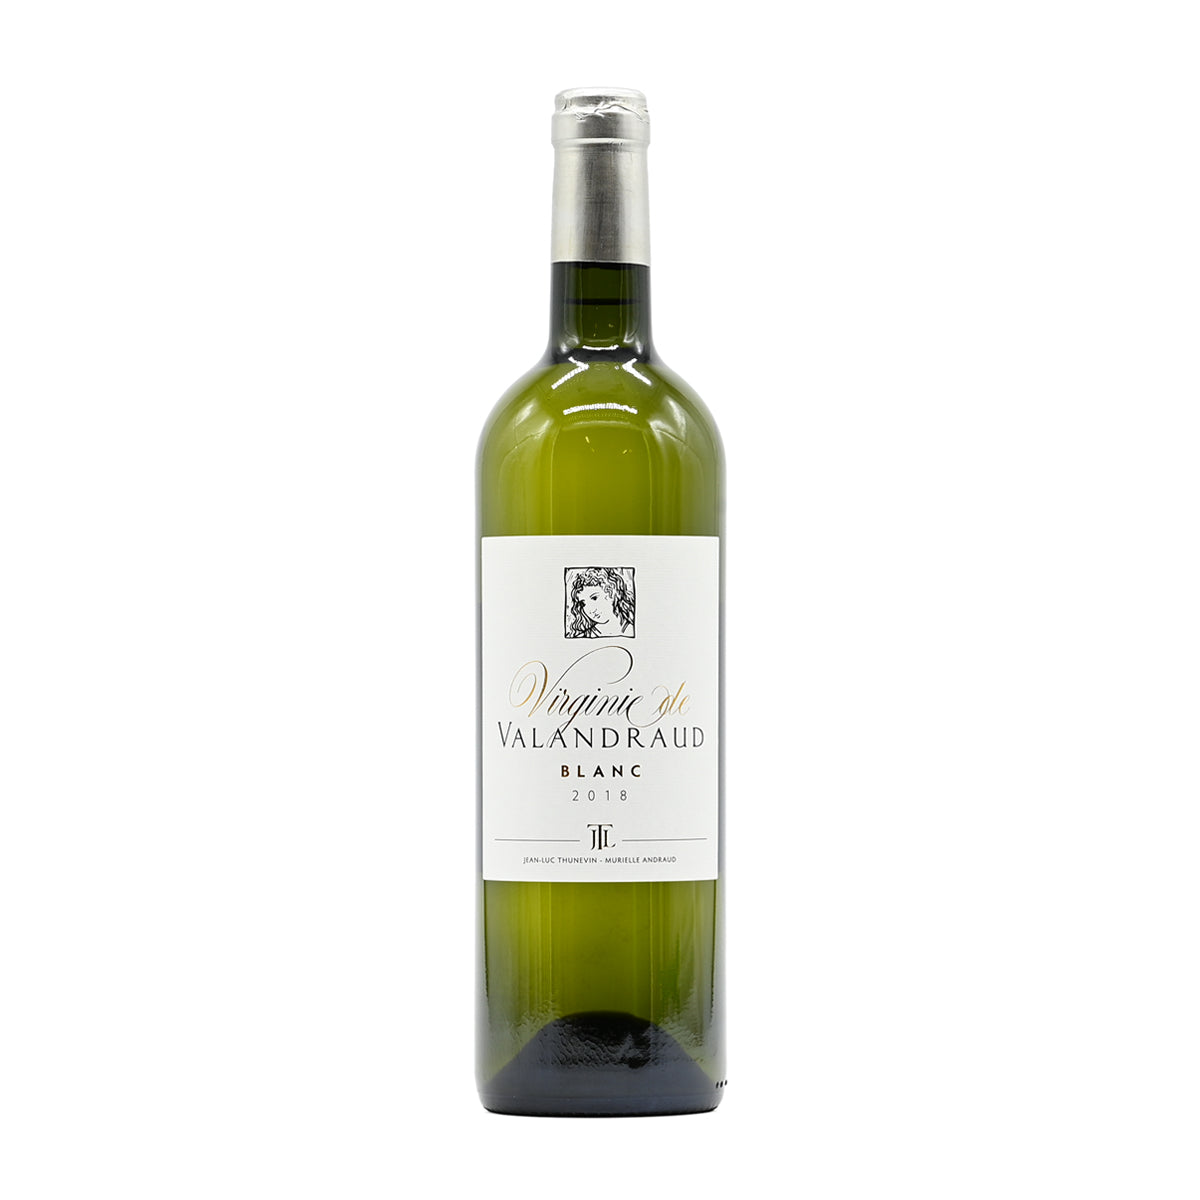 Virginie de Valandraud Blanc 2018, 750ml French white, made from a blend of Sémillon, Sauvignon Blanc and Sauvignon Gris; from Bordeaux, France – GDV Fine Wines, Hong Kong